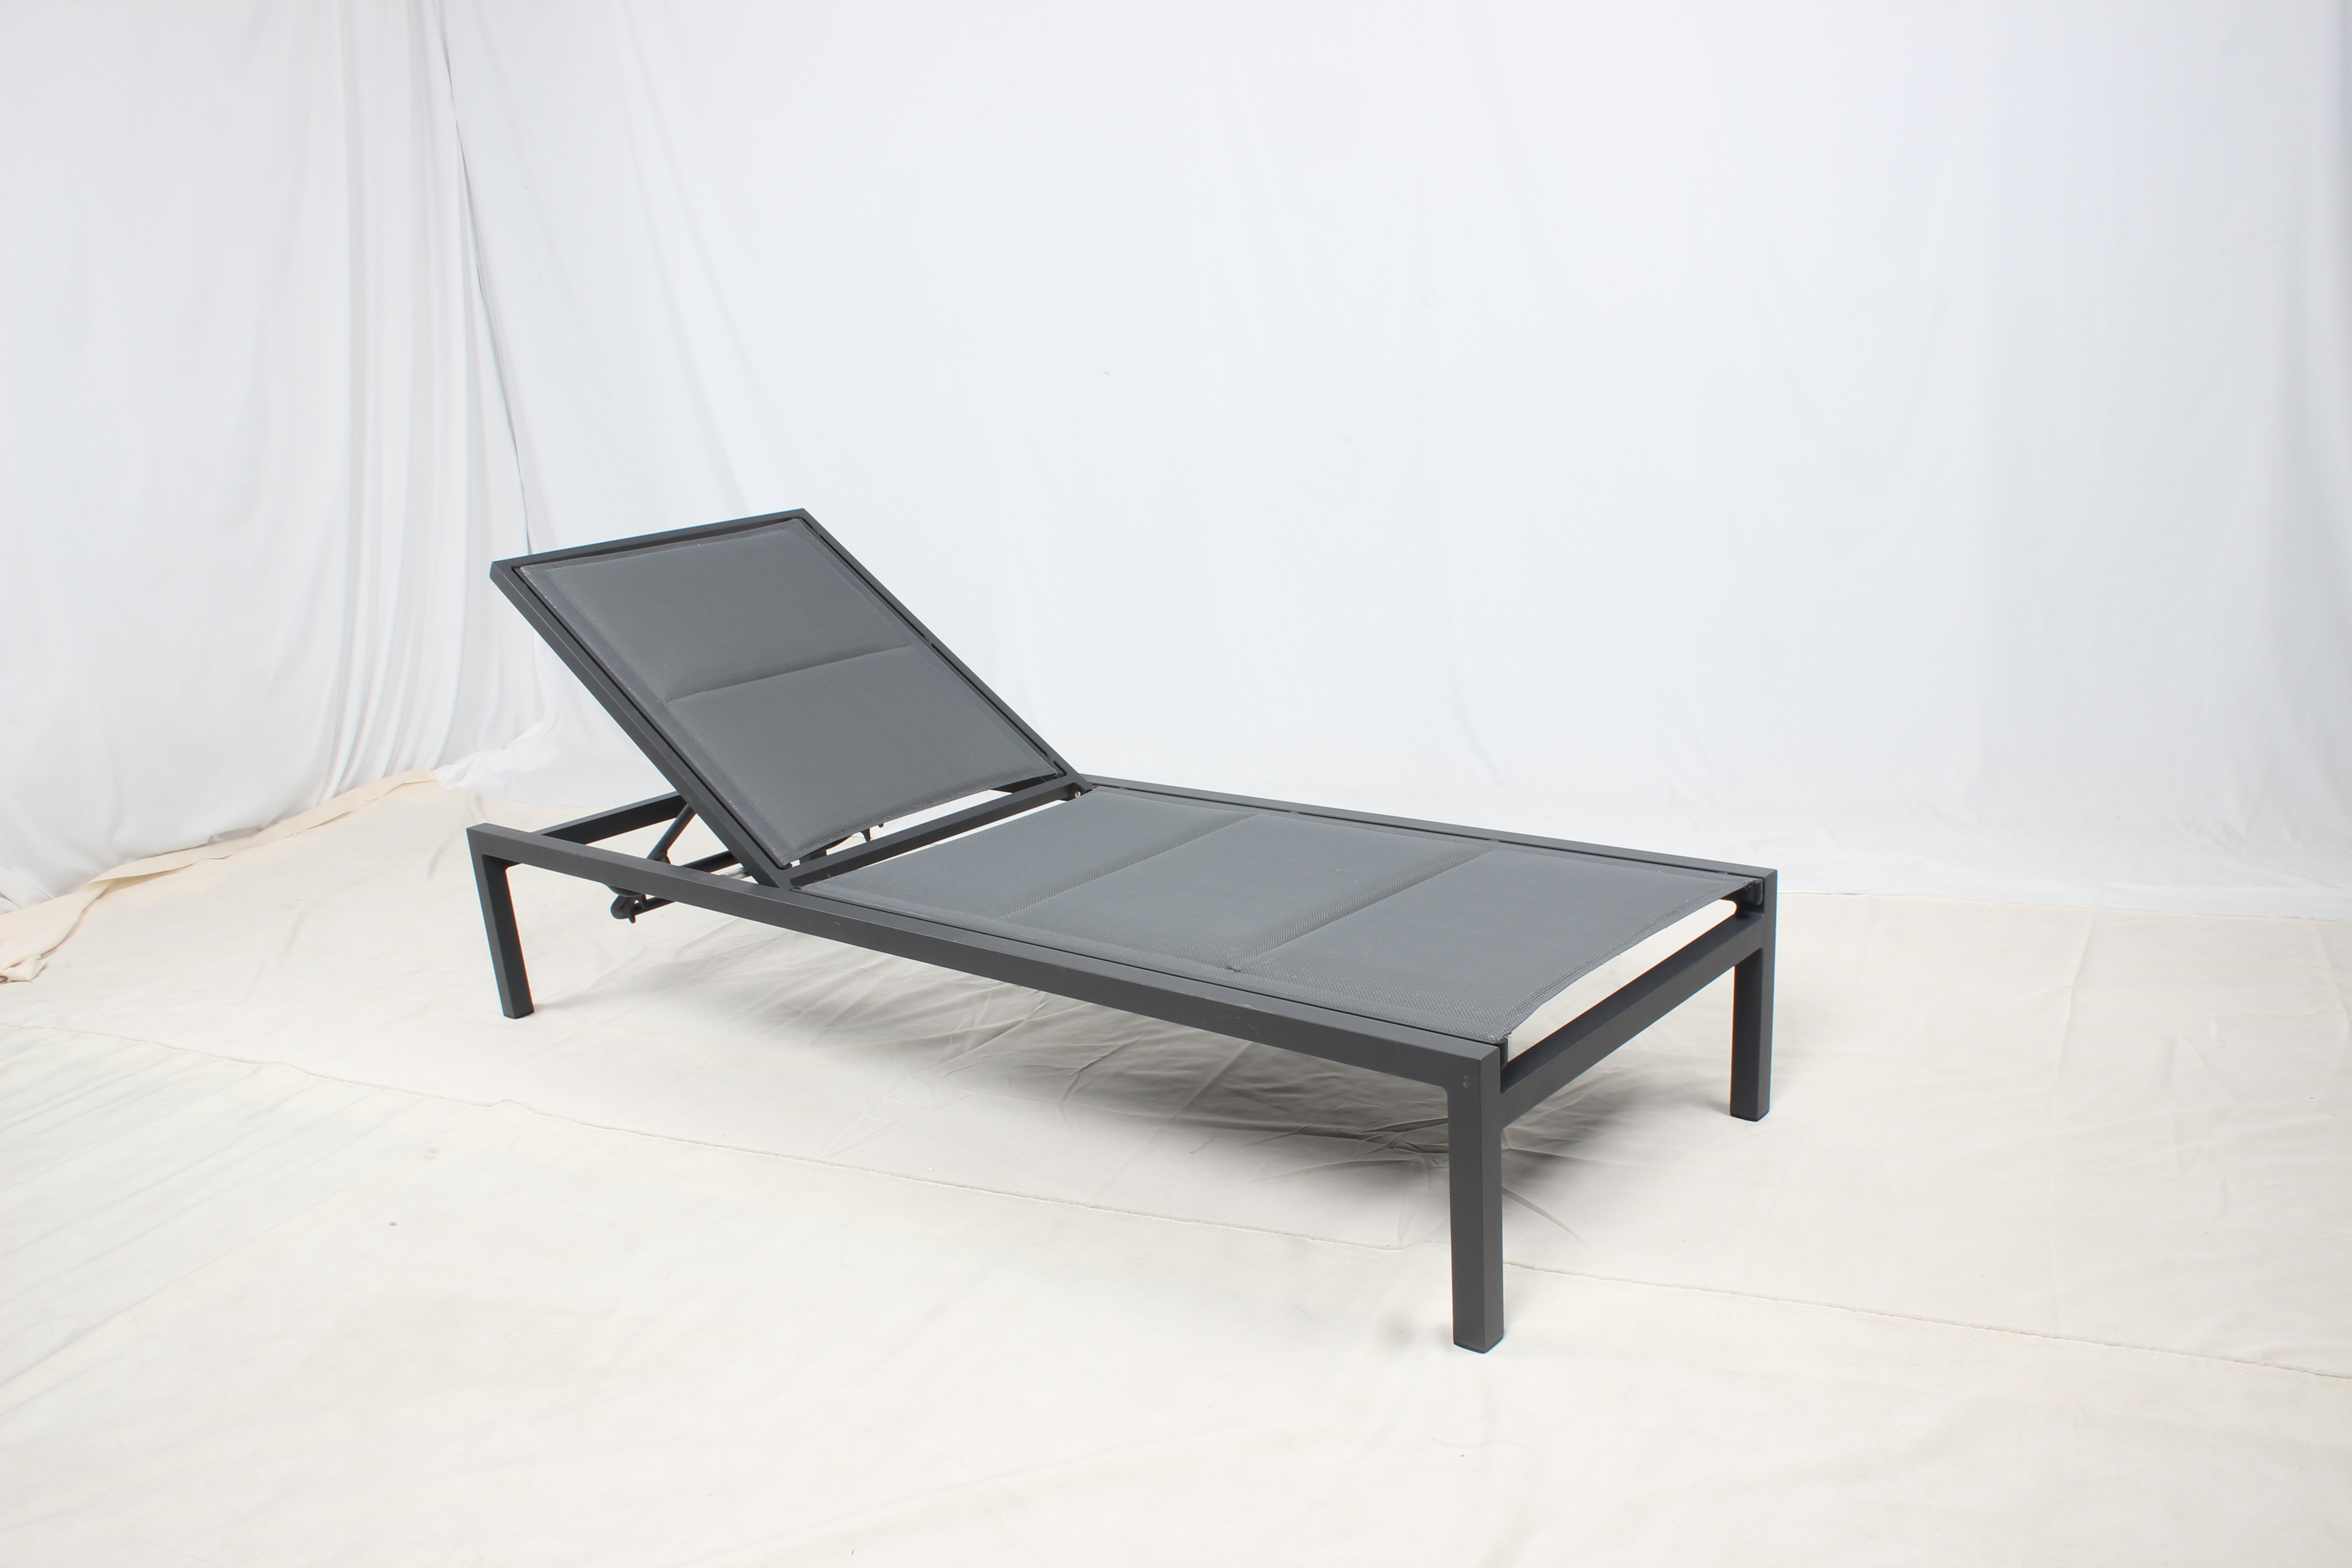 Outdoor pool aluminum reclining chaise lounge